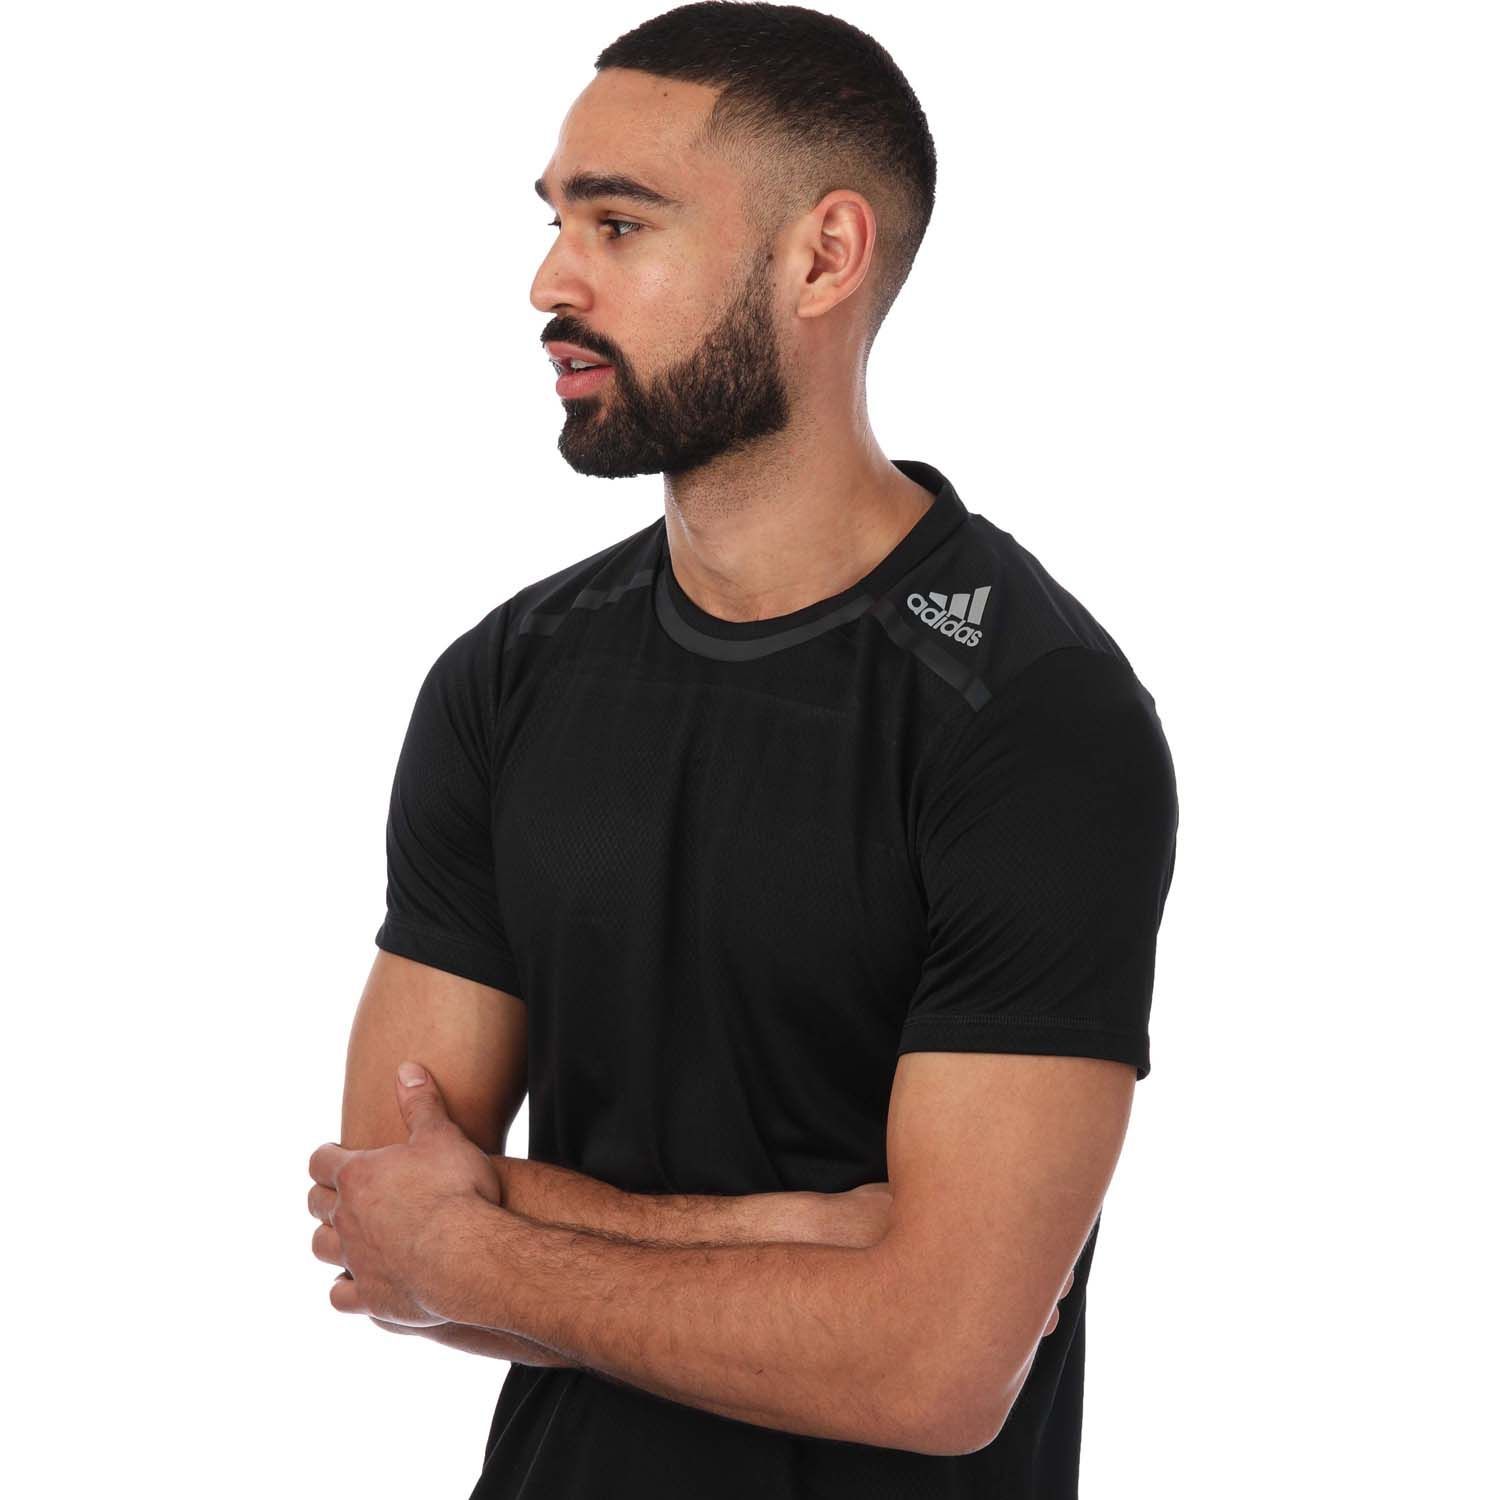 Mens adidas Designed for Training Workout Training T- Shirt in black.- Crewneck.- Short sleeves.- Mesh underarm panel.- Moisture-absorbing AEROREADY.- Slim fit.- 100% Polyester (Recycled).- Ref: HE5441